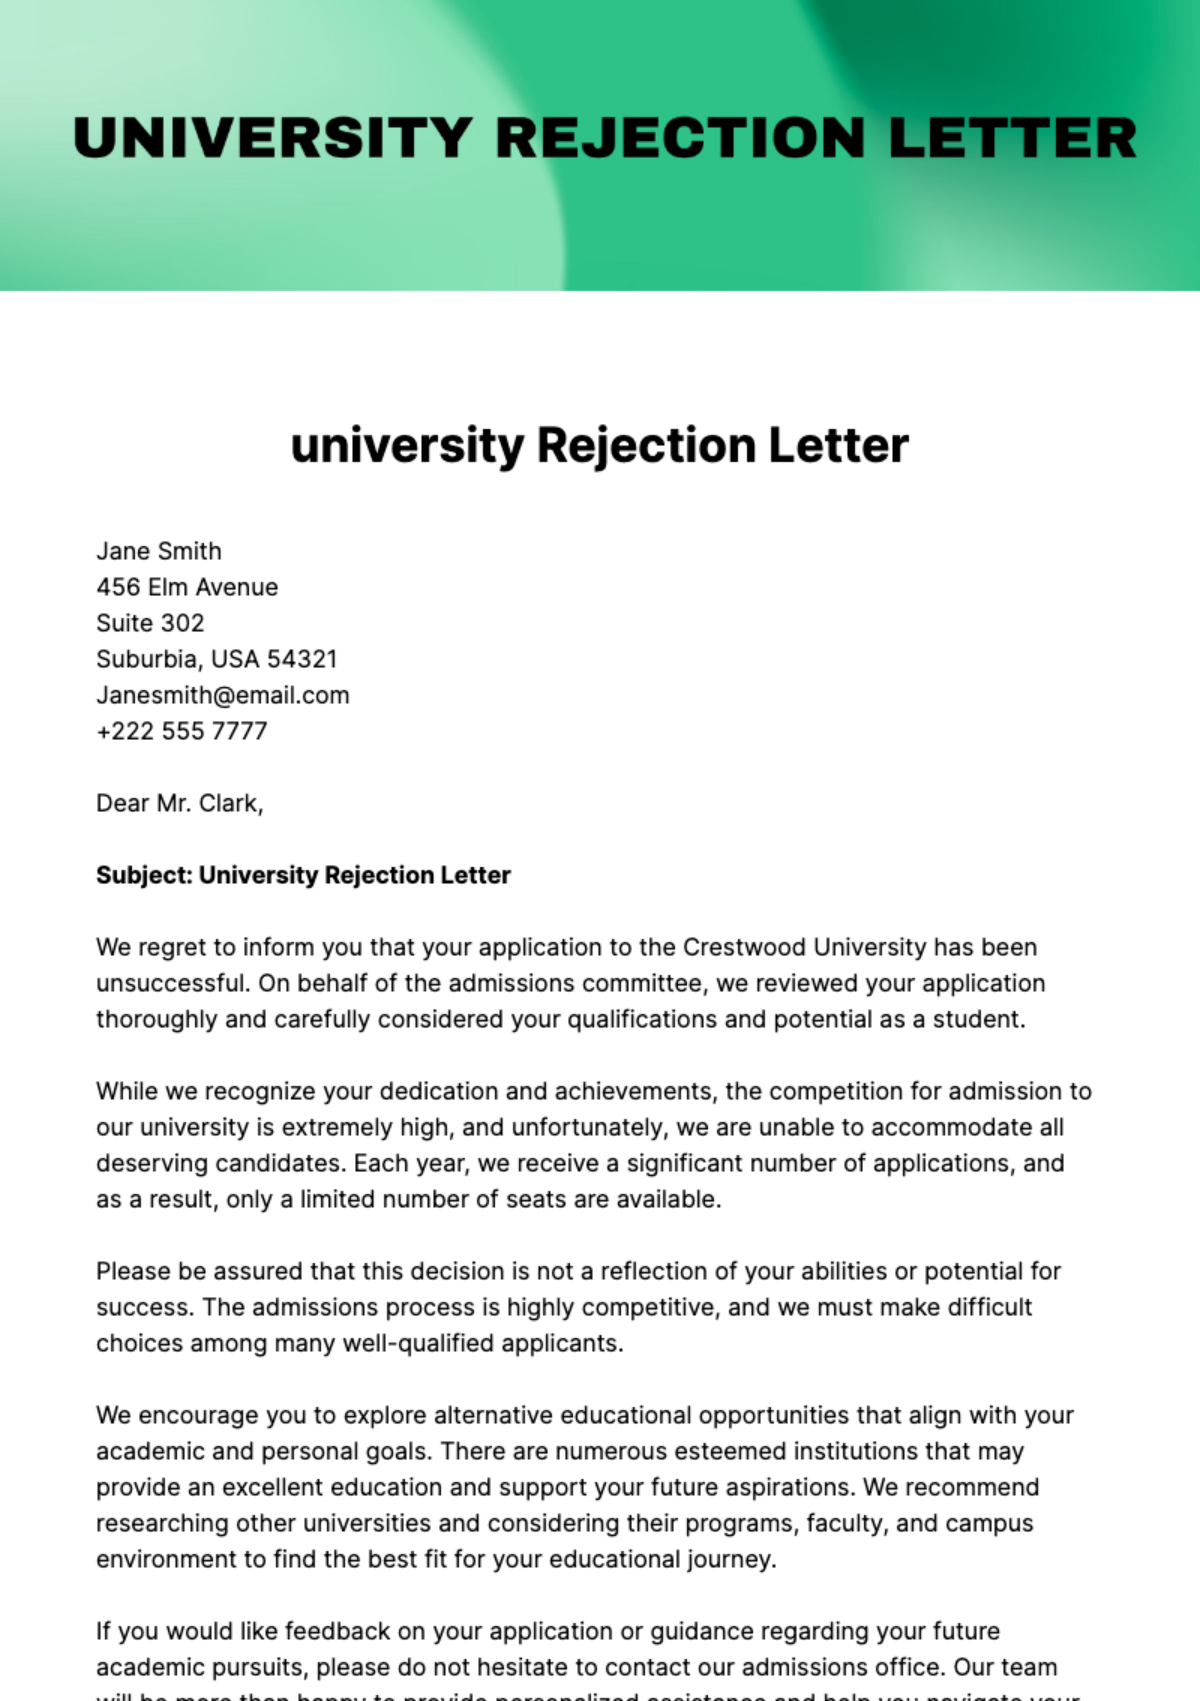 Free university Rejection Letter Template